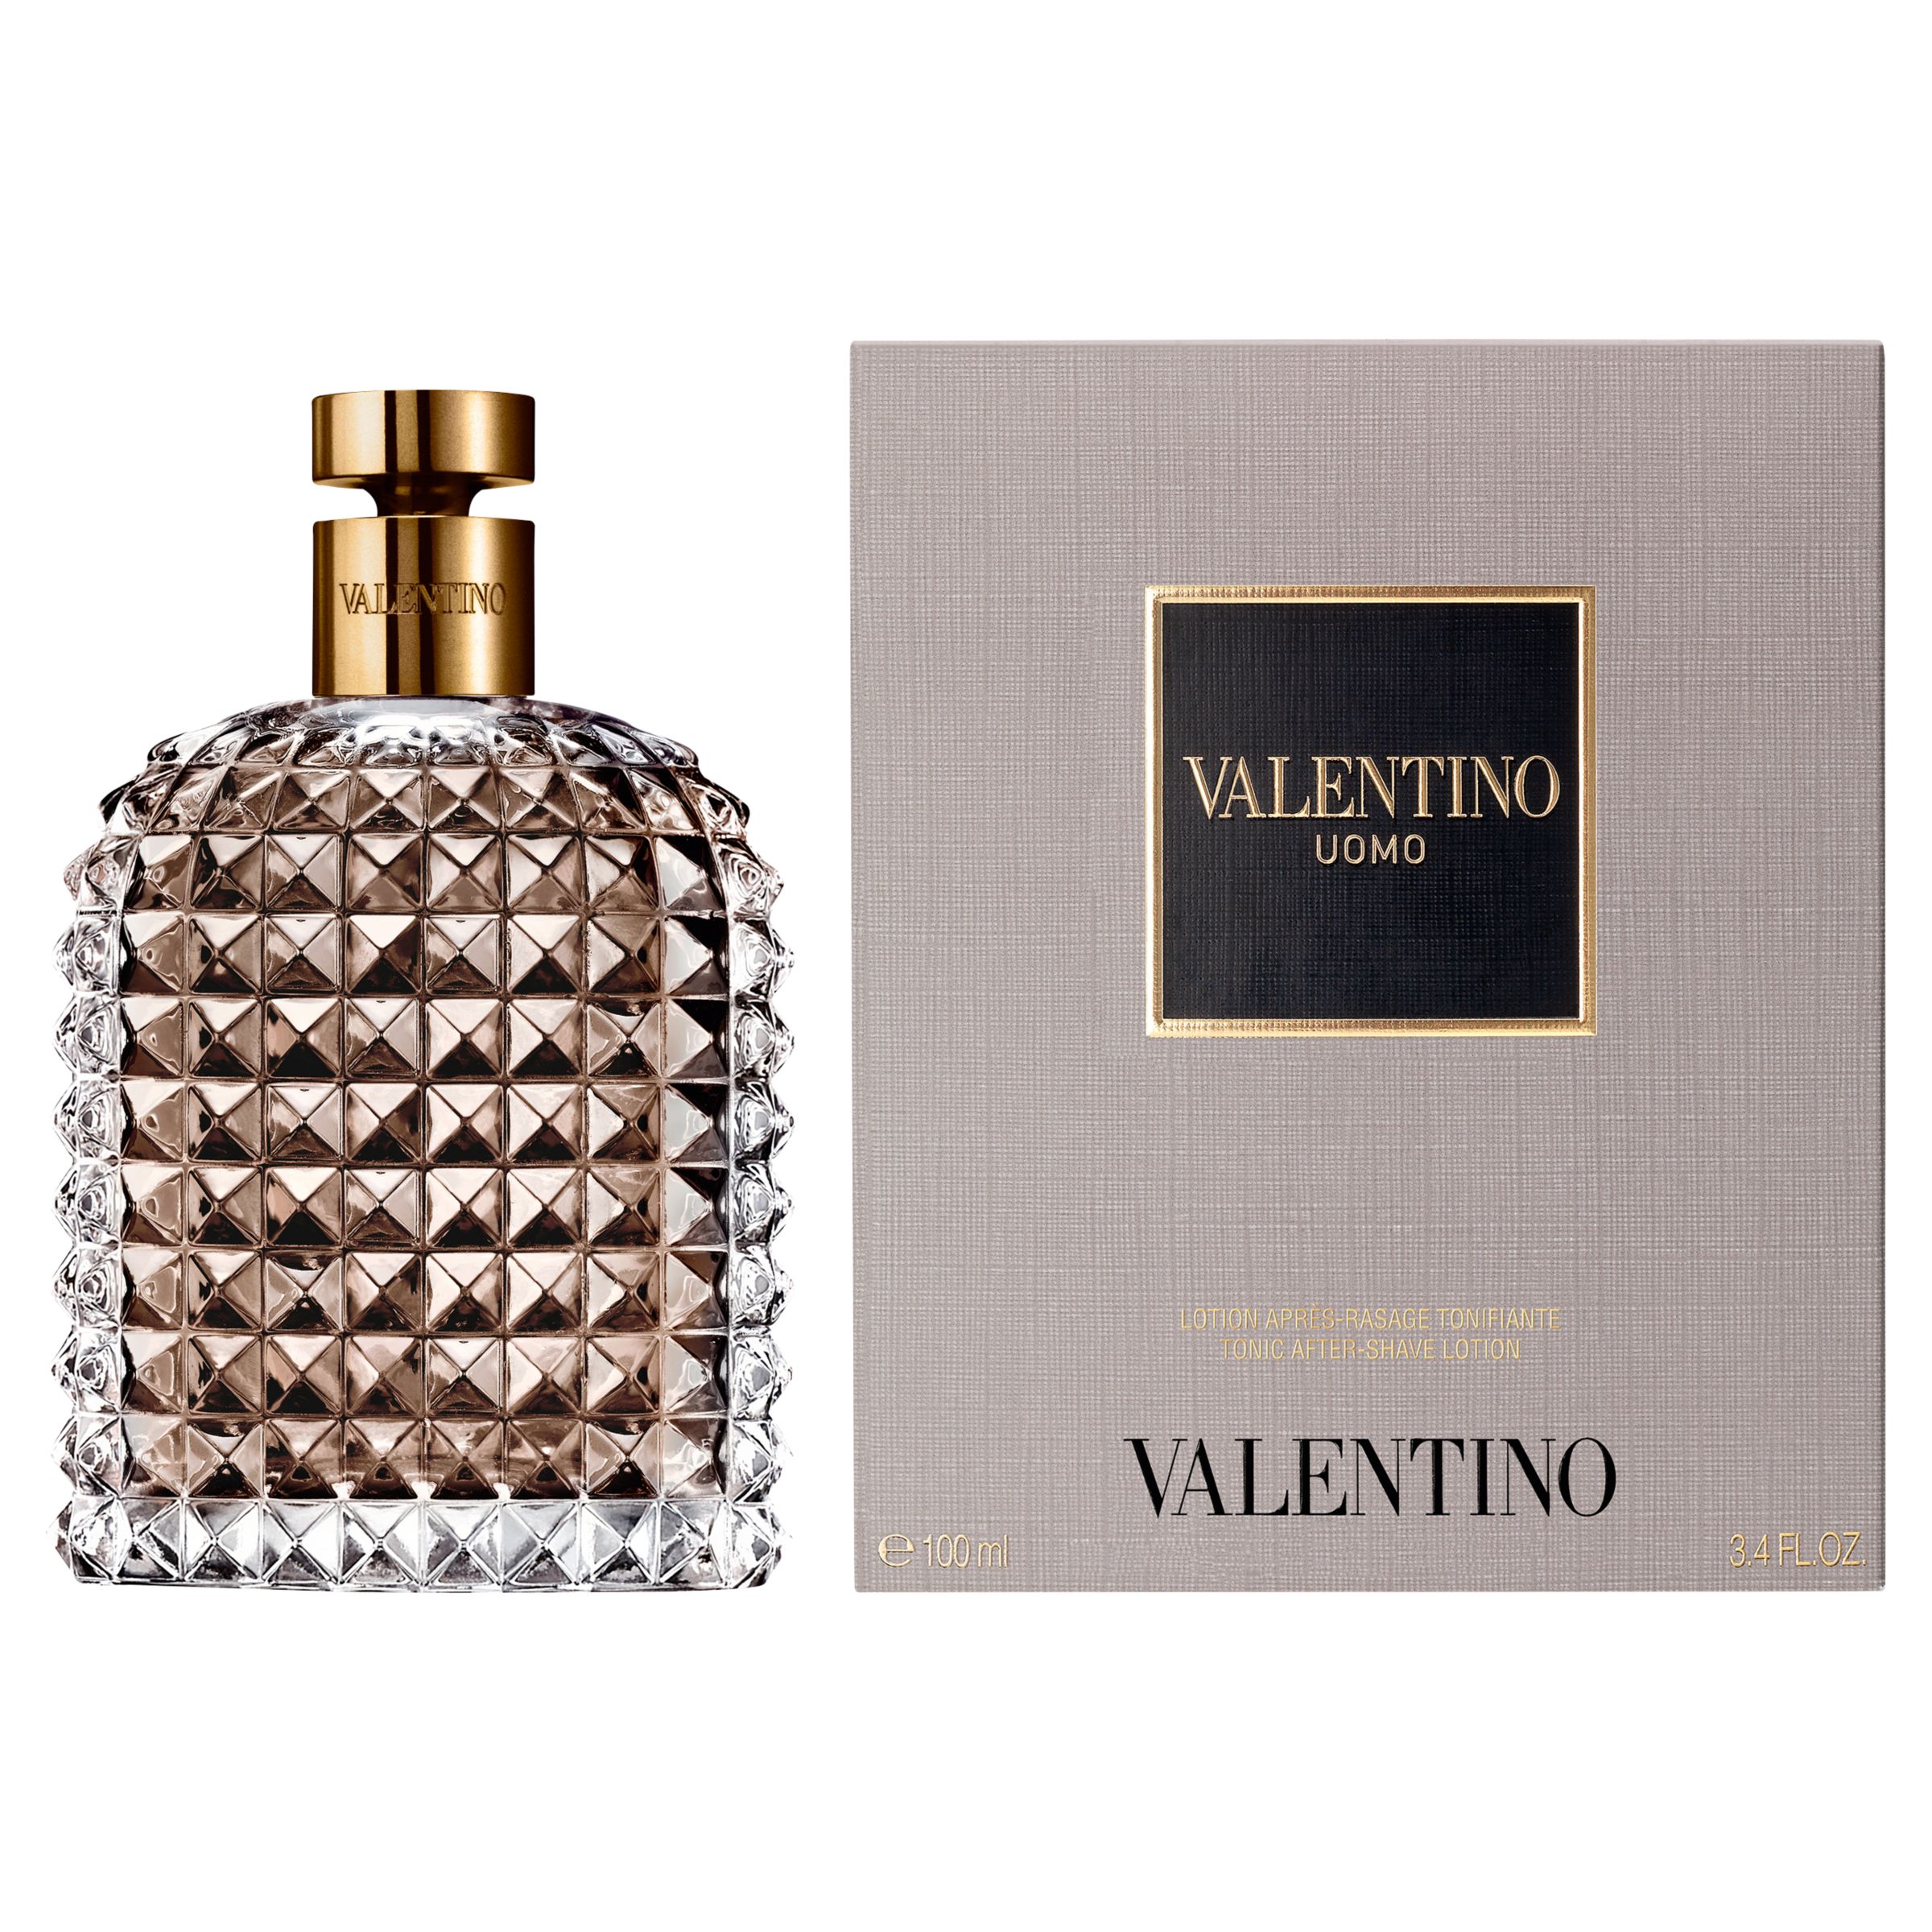 Valentino Uomo Aftershave Lotion, 100ml at John Lewis